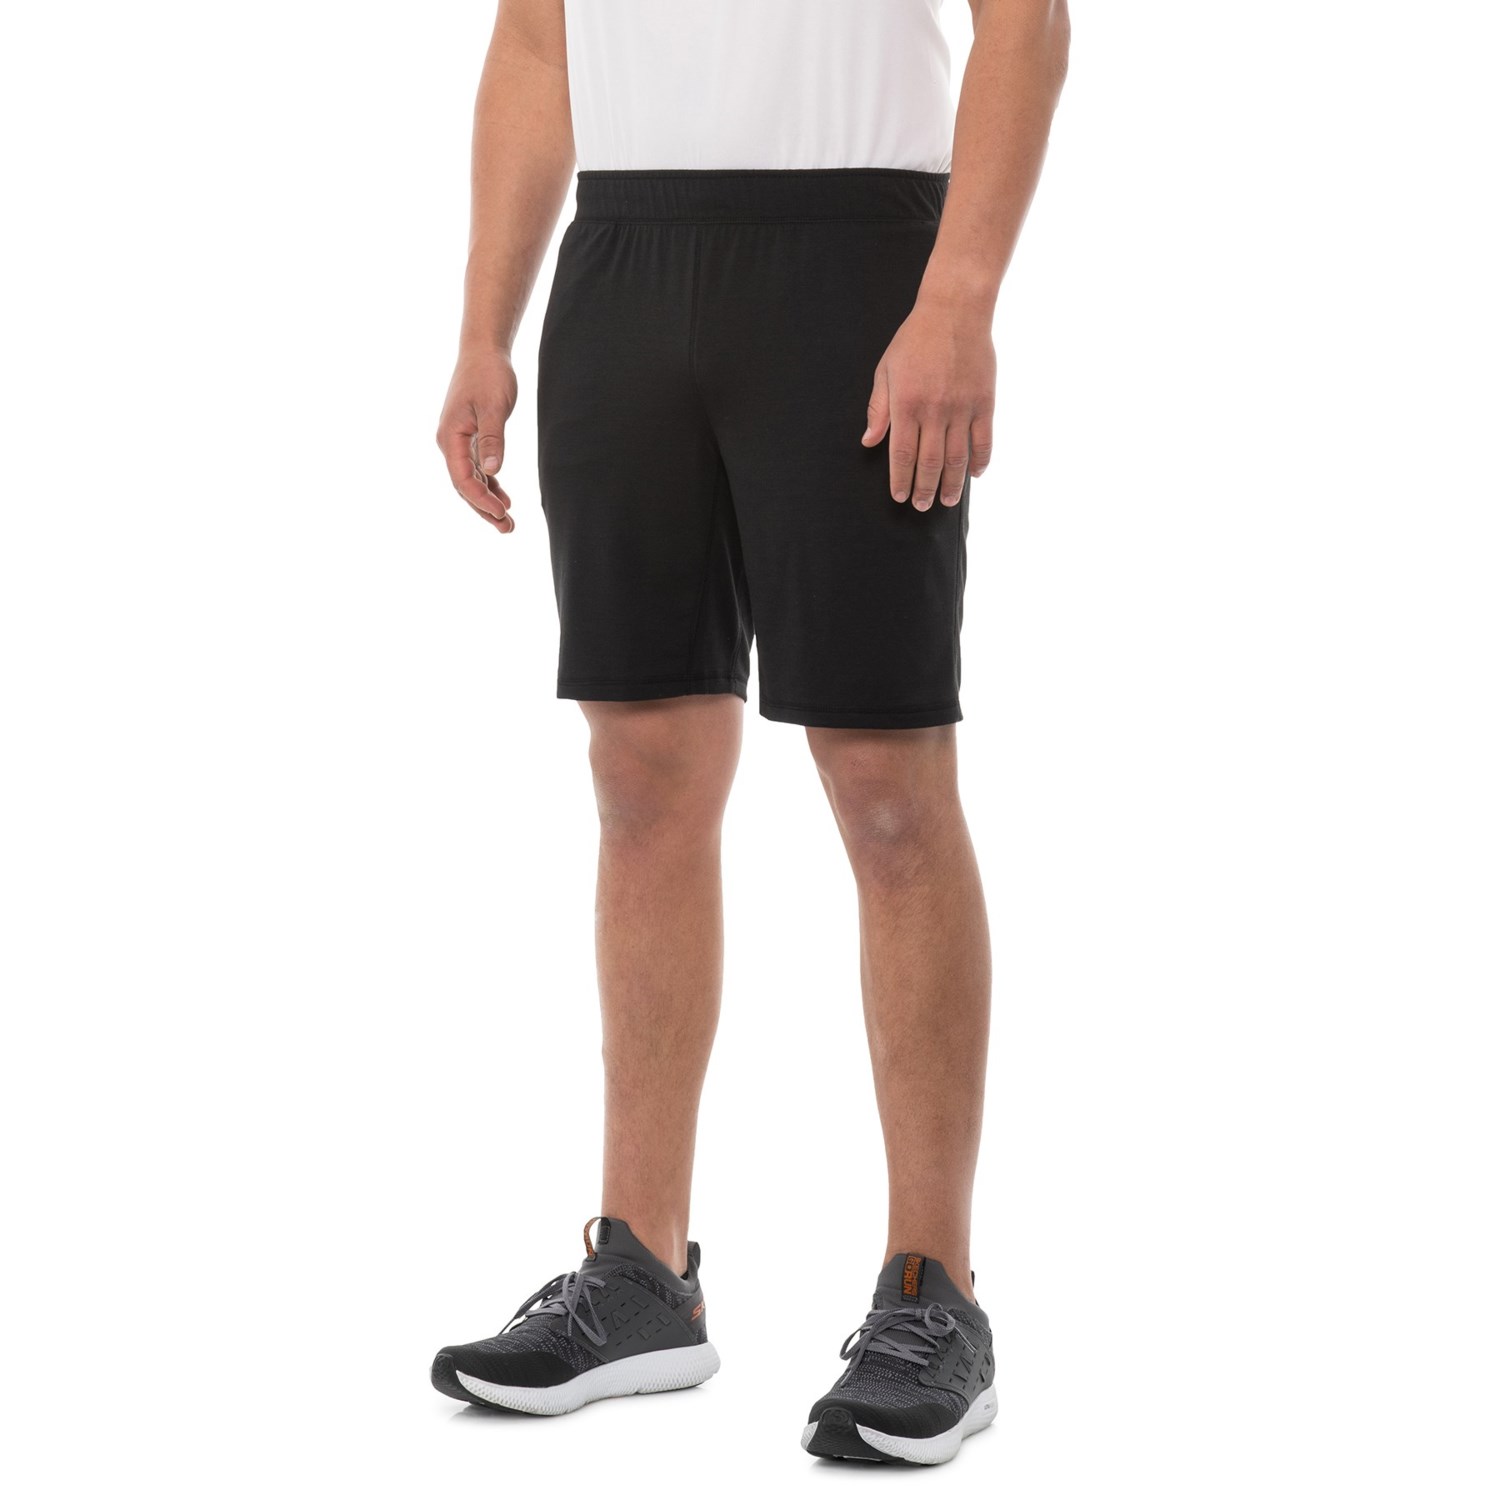 Apana Solid Baby French Terry Shorts (For Men) - Save 64%